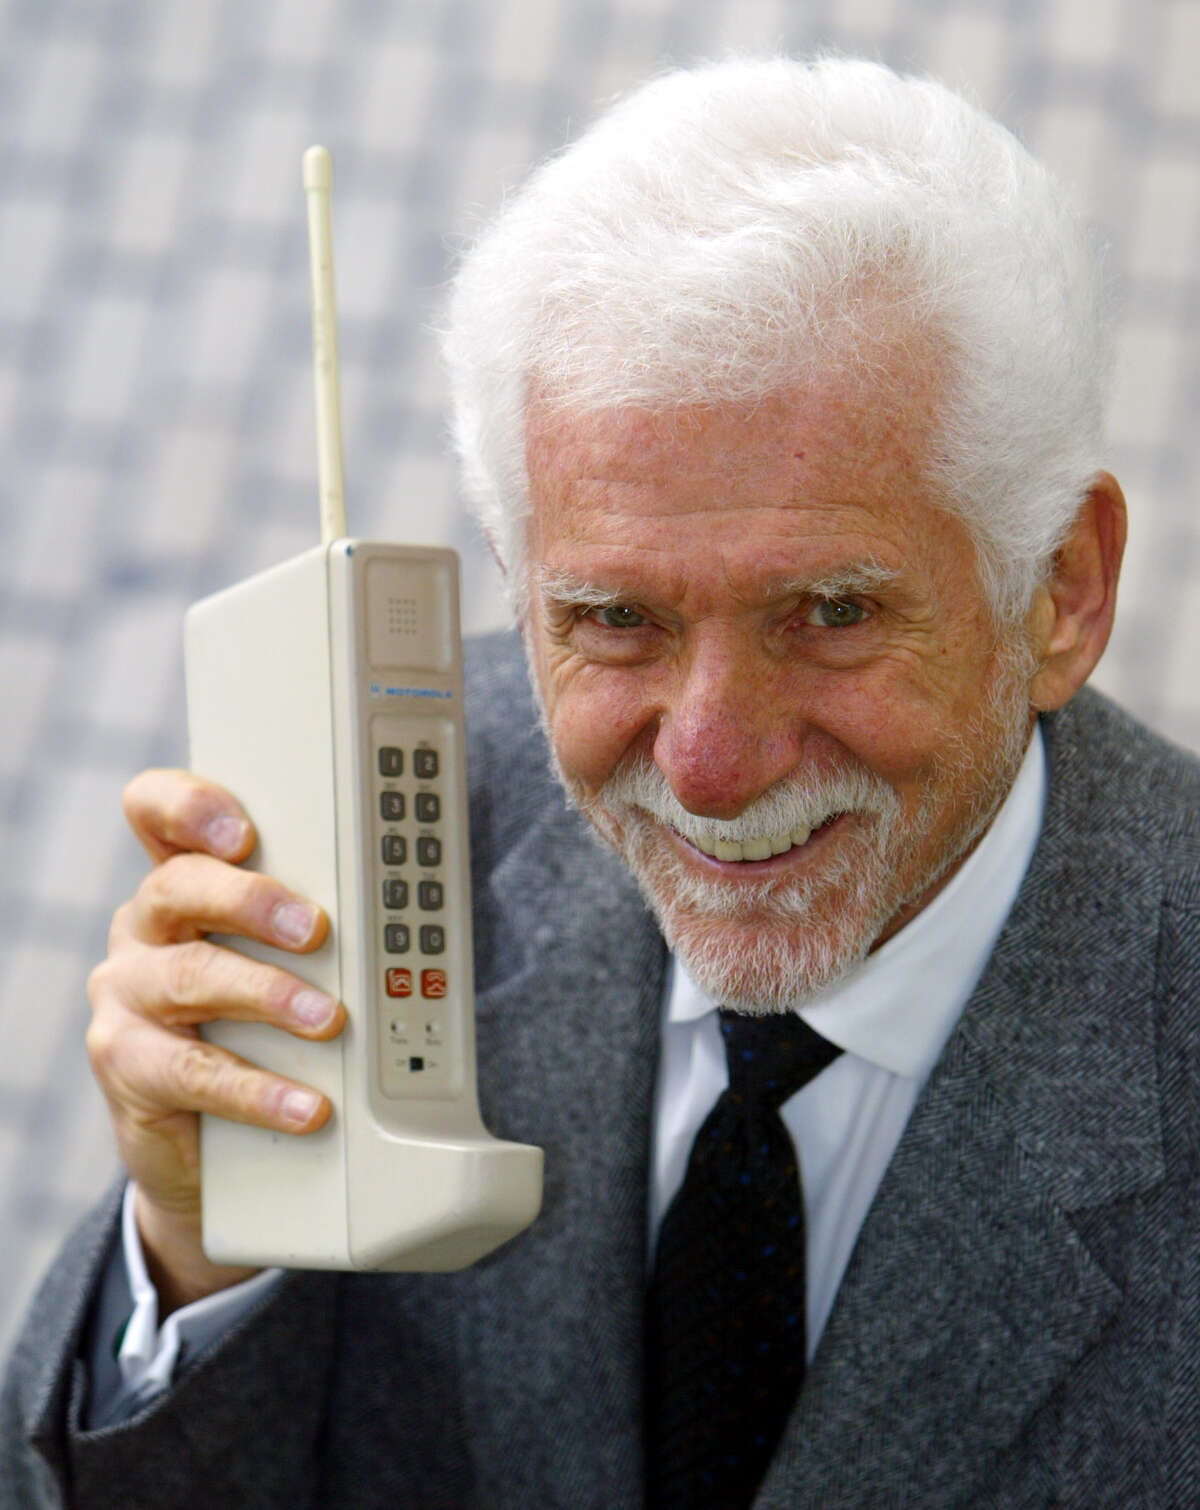 History of the cell phone Martin Cooper, chairman and CEO of ArrayComm, holds a Motorola DynaTAC, a 1973 prototype of the first handheld cellular telephone in San Francisco, Wednesday April 2, 2003. (AP)